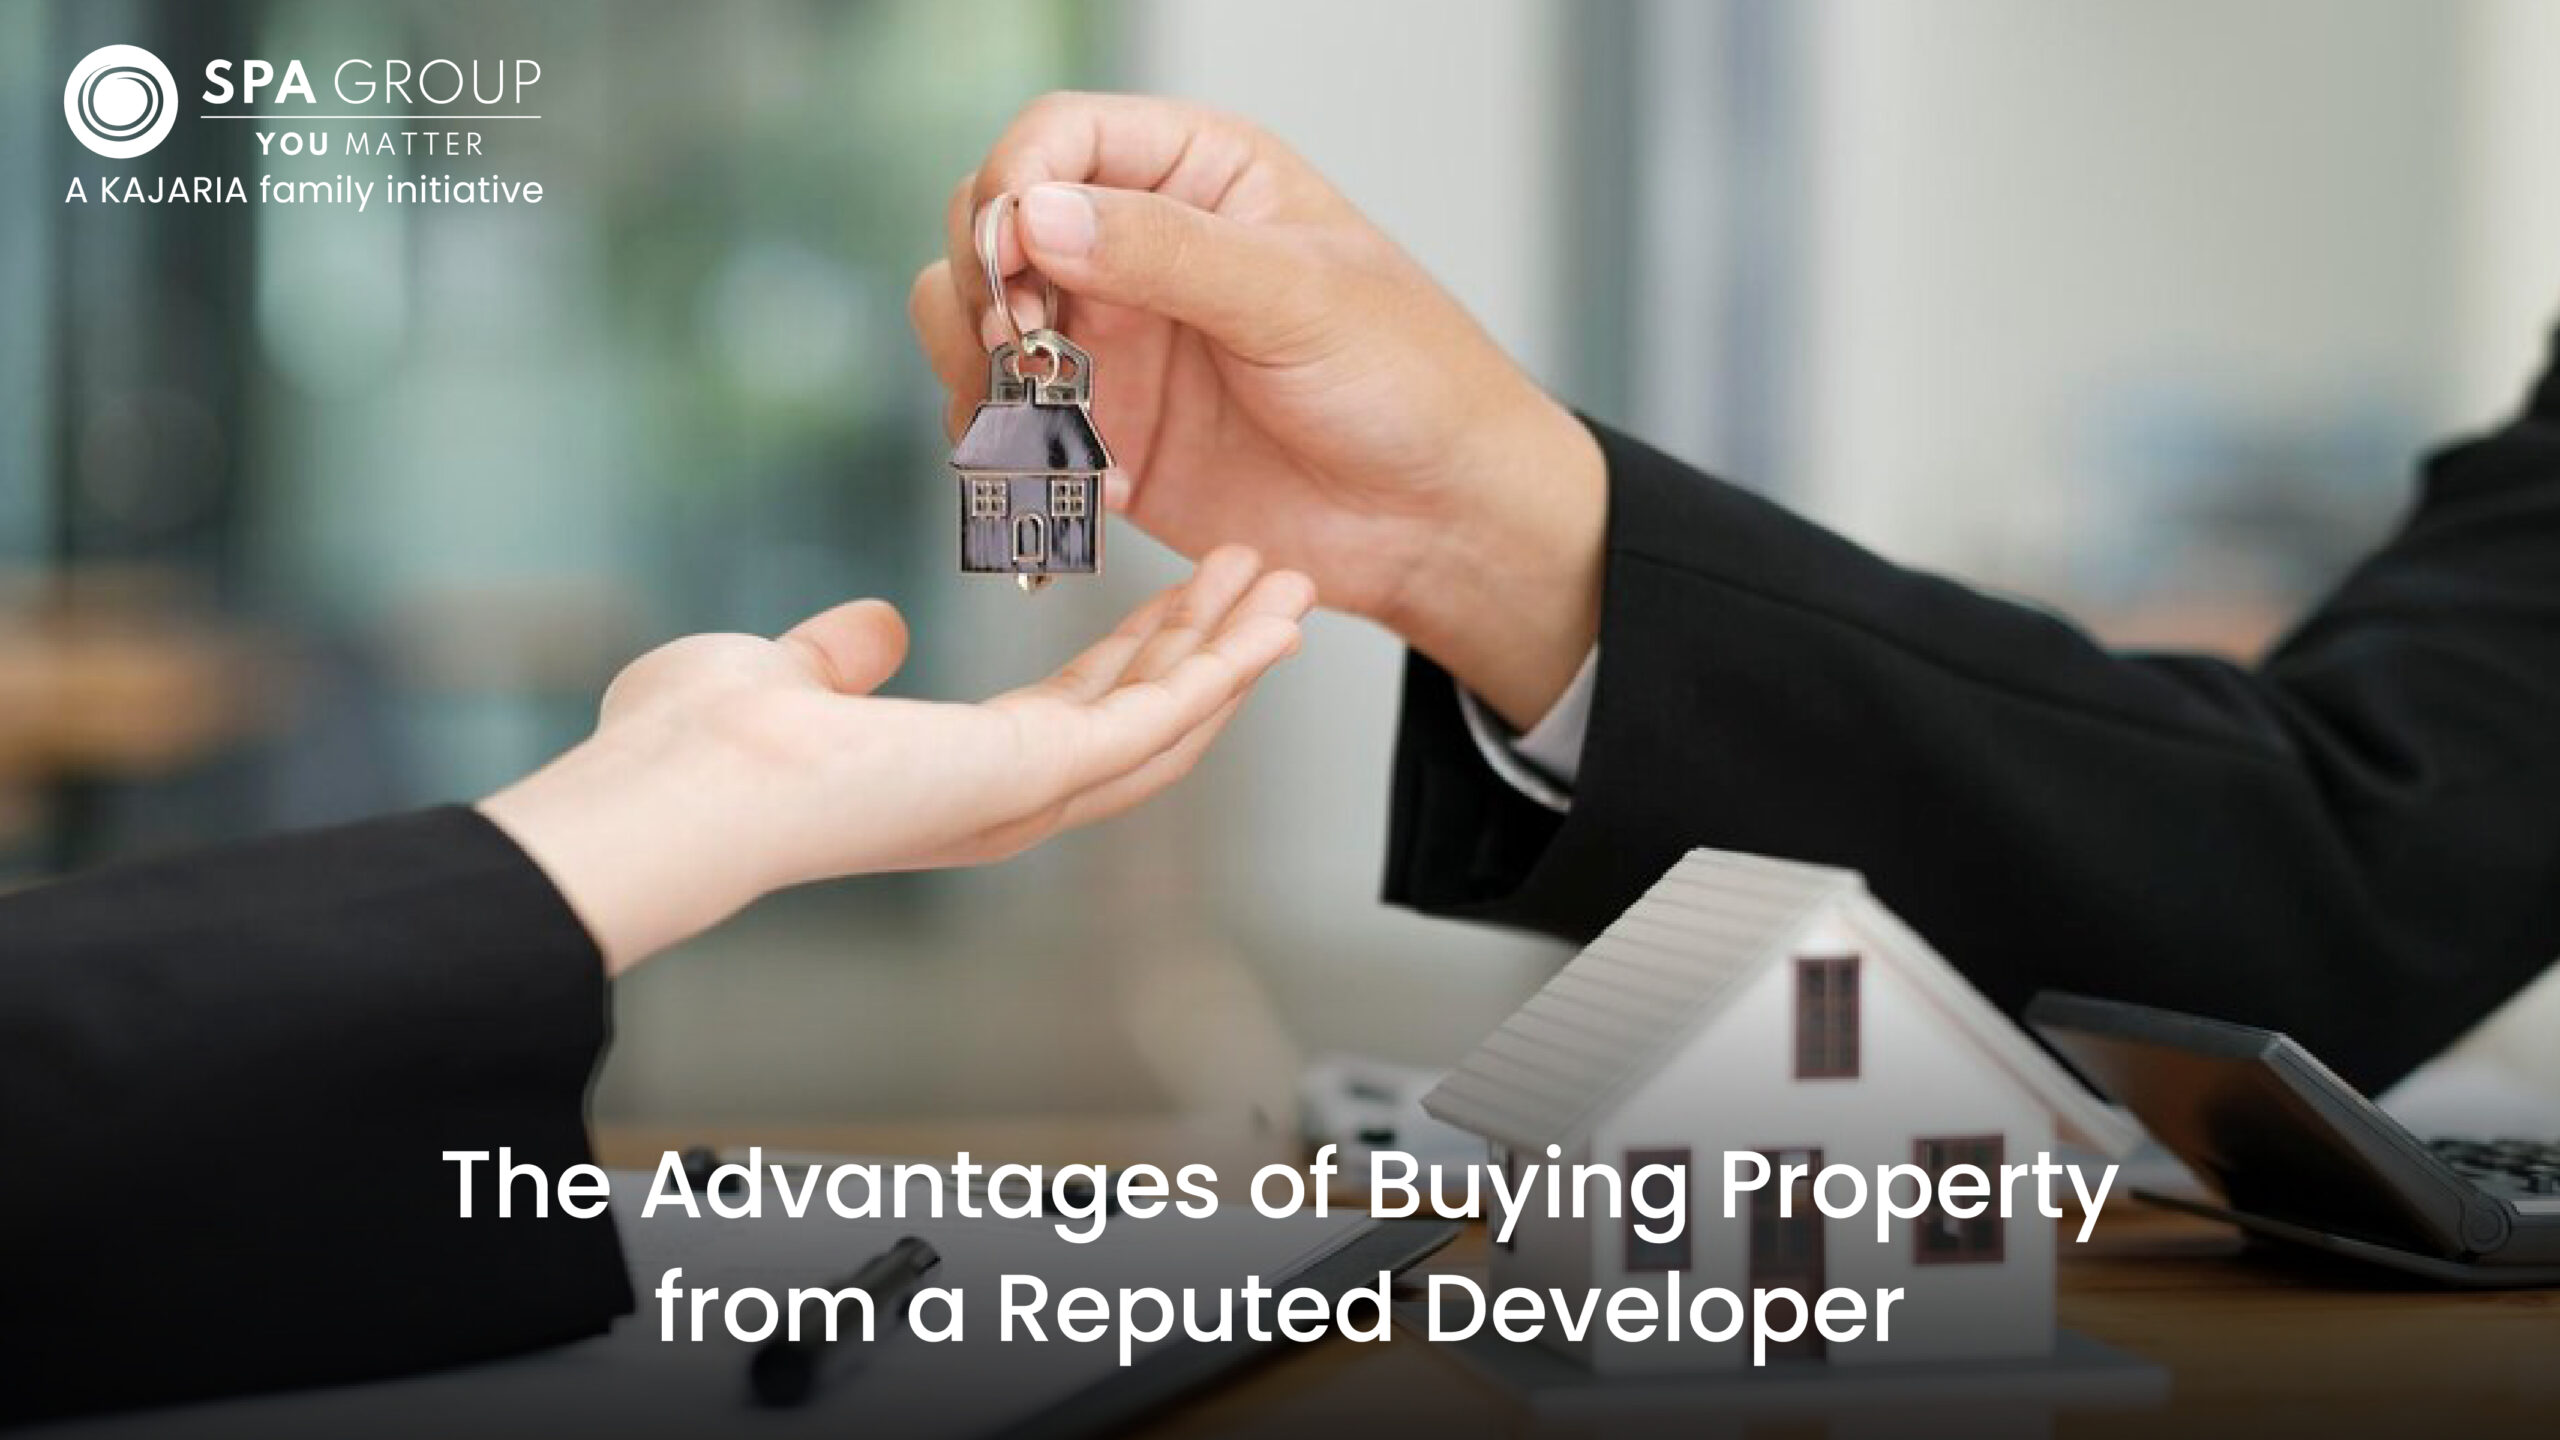 The Advantages of Buying Property from a Reputed Developer